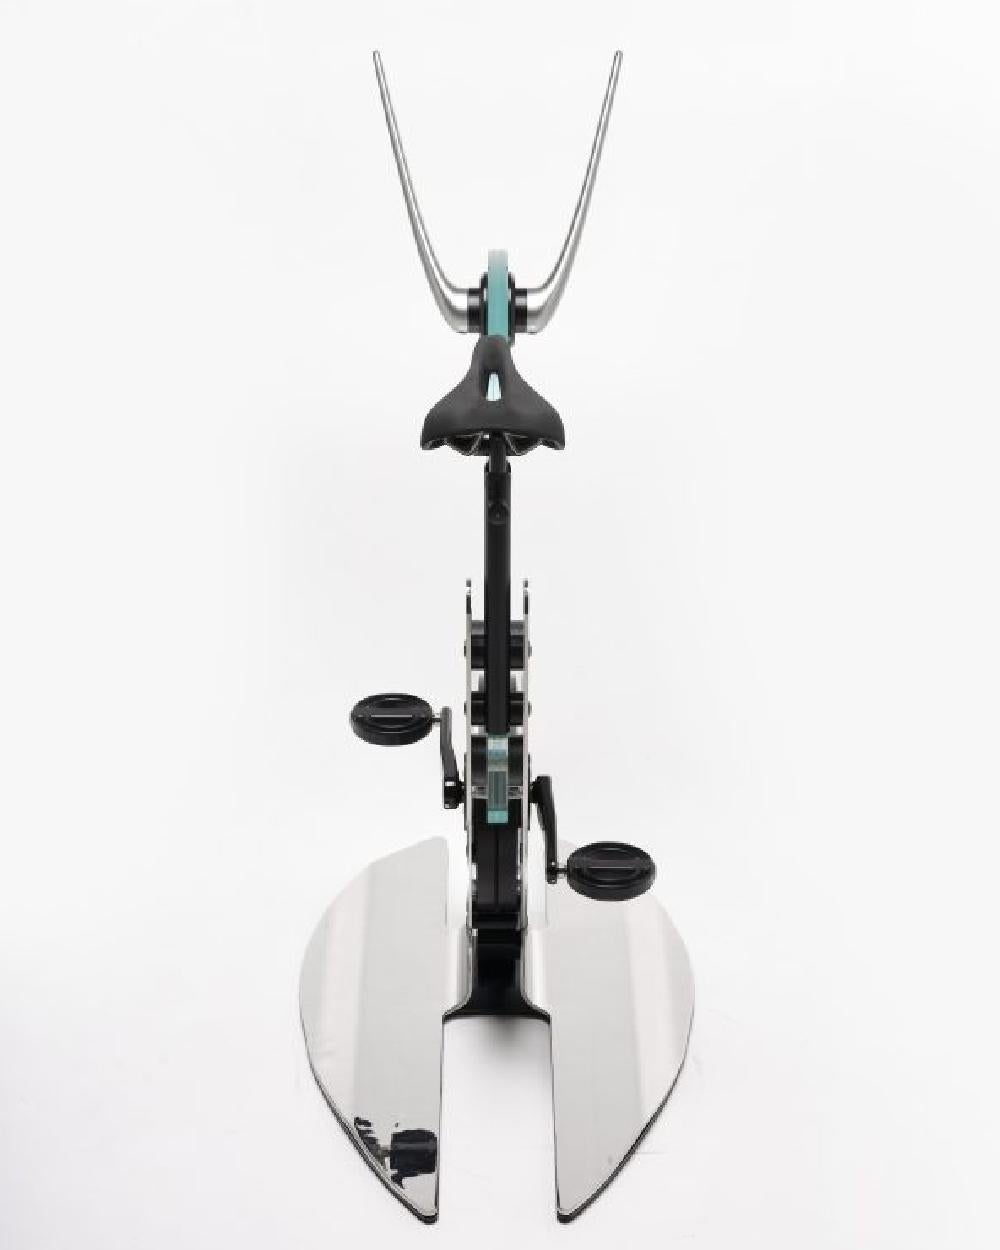 Ciclotte exercise bike designed by Luca Schieppati and Gianfranco Barban for Teckell is a part of the fitness collection. The bike is built with a crystal disk and either a chrome or black carbon frame. Through extensive research the ergonomics of